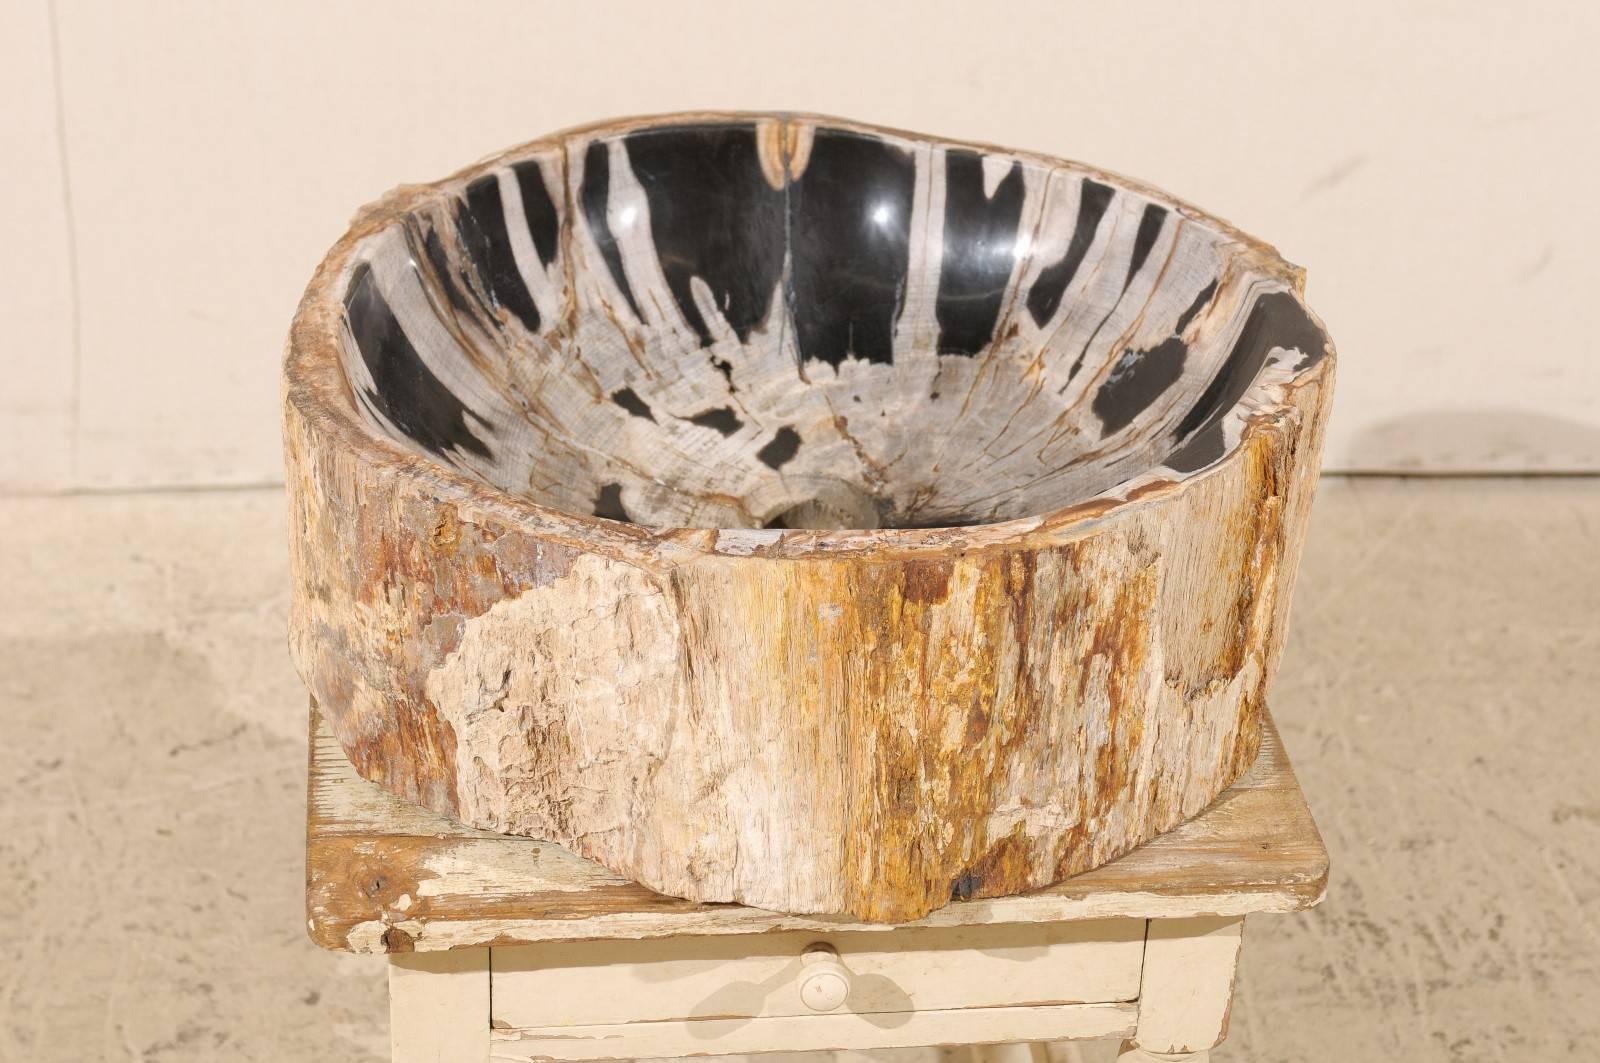 20th Century Black and Cream Colored Petrified Wood Sink Great for a Powder Room Vanity